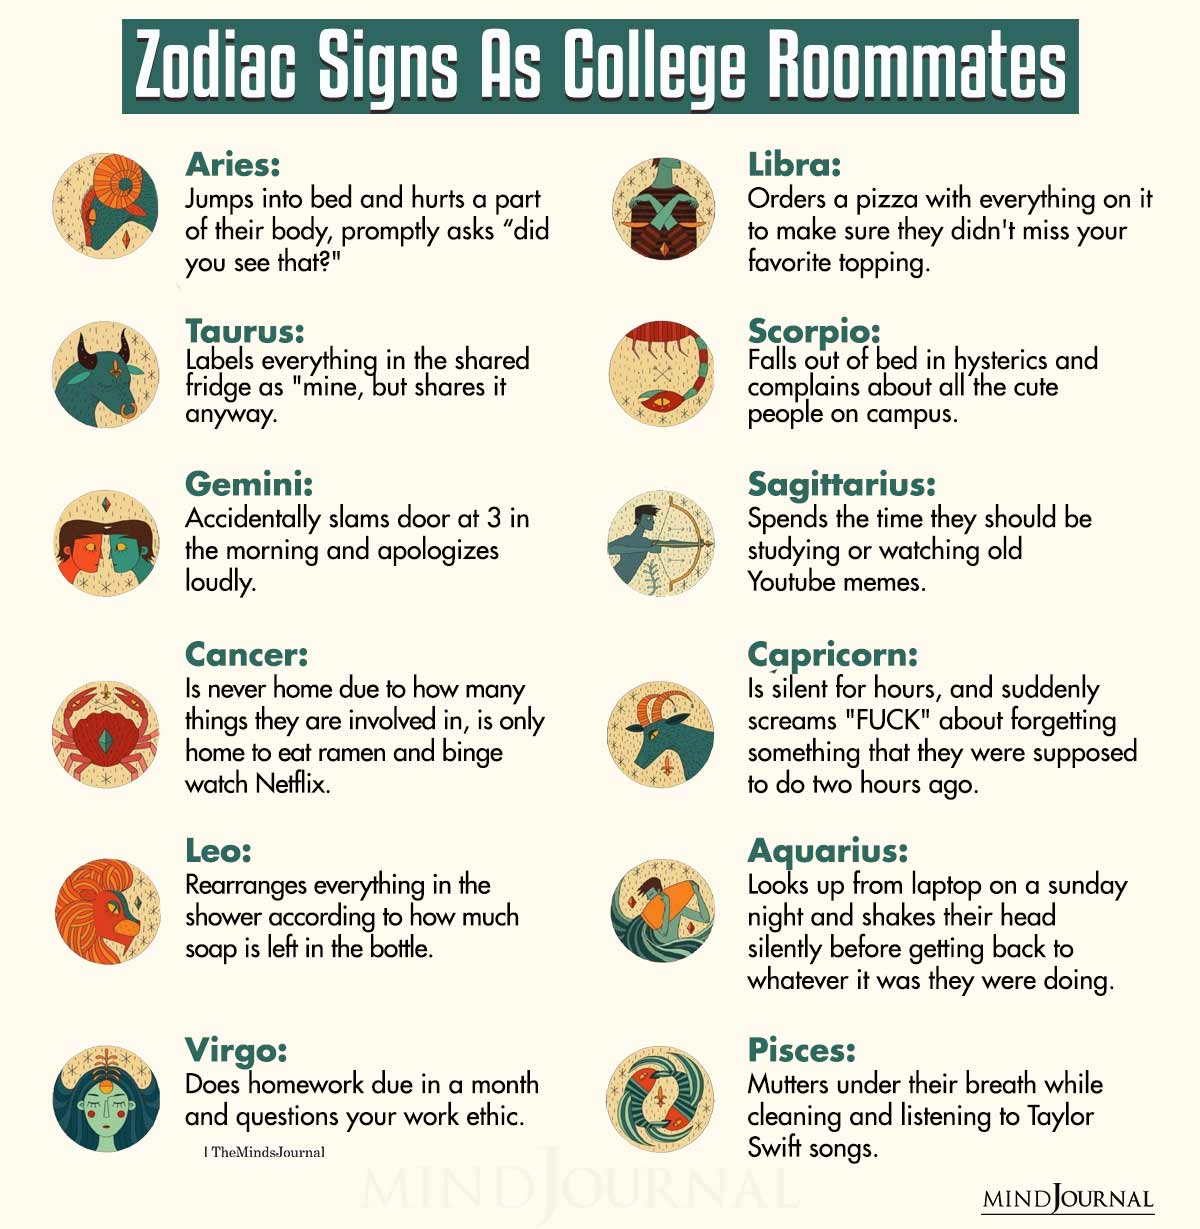 Zodiac Signs As College Roommates